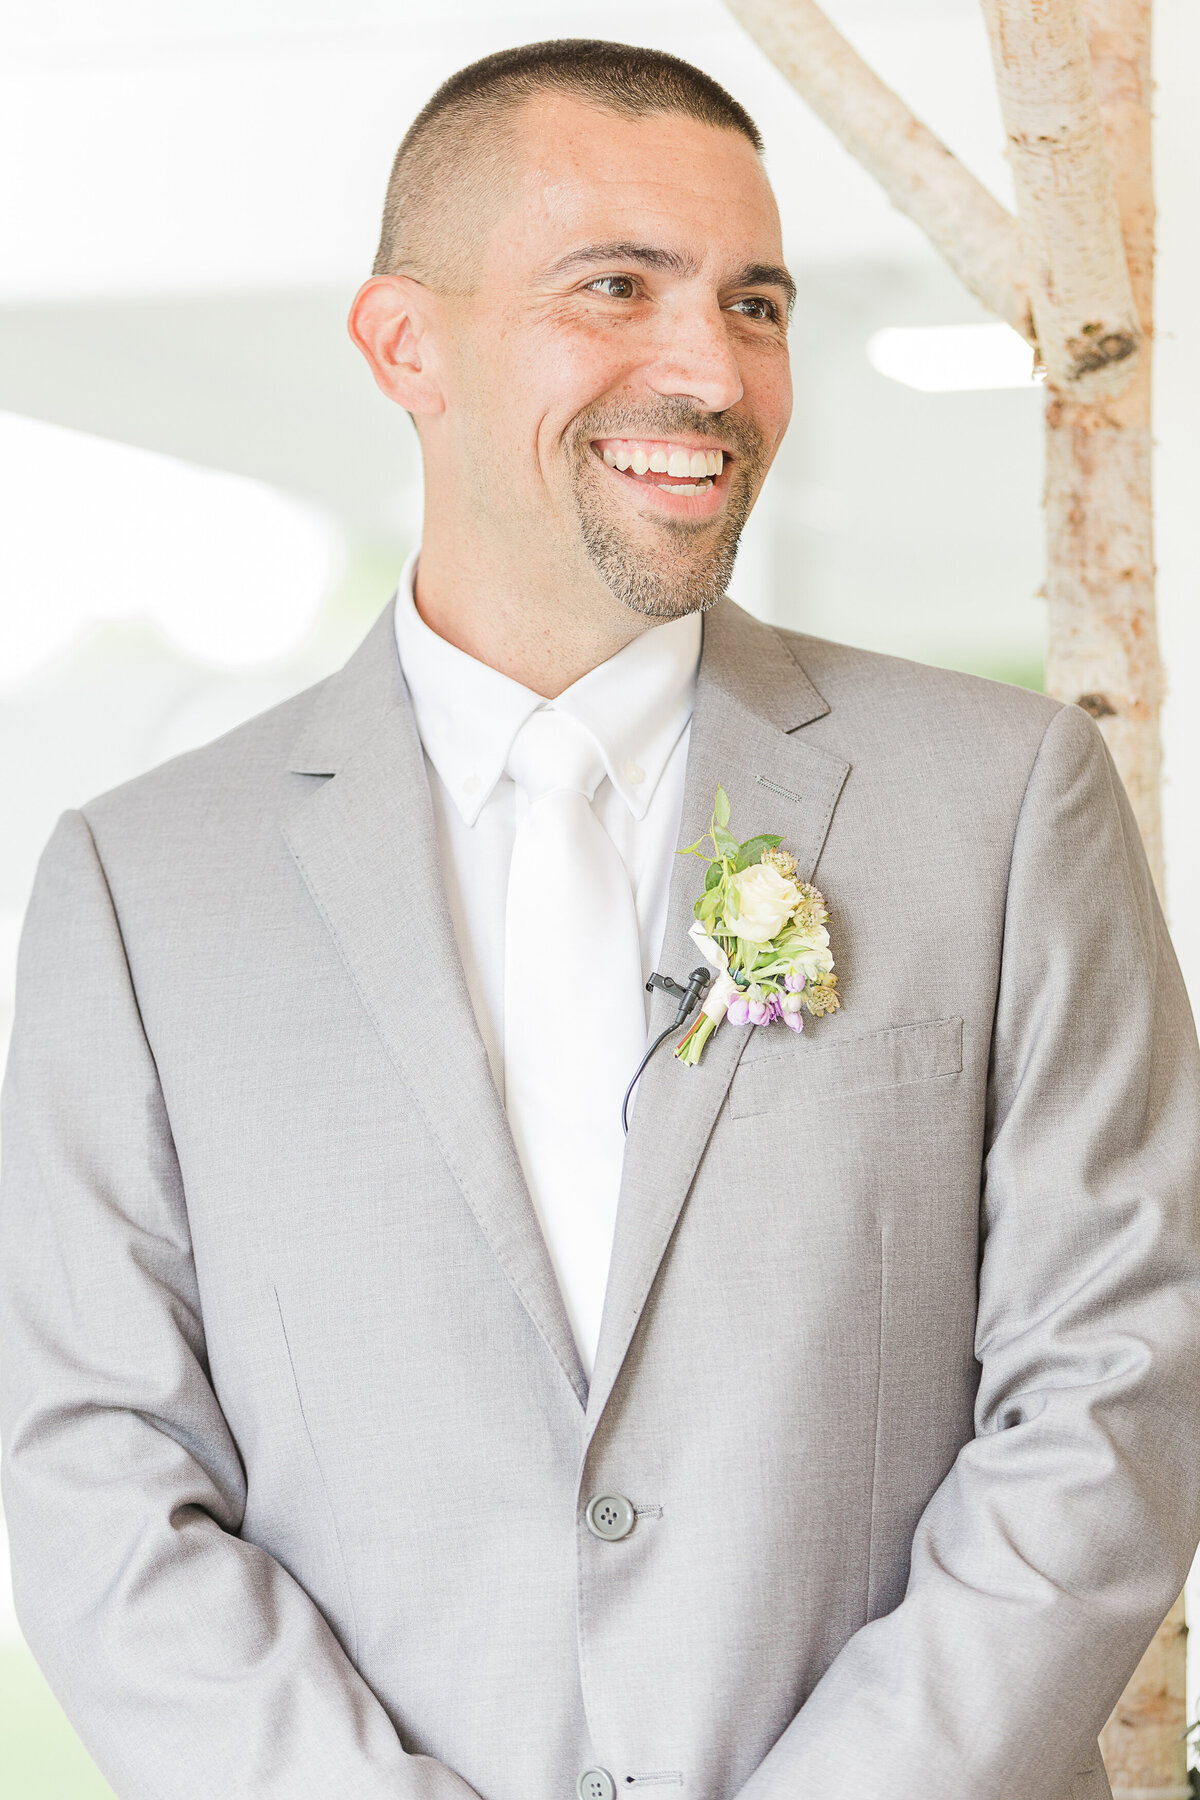 Groom is captured smiling as he sees his bride walk down the aisle.